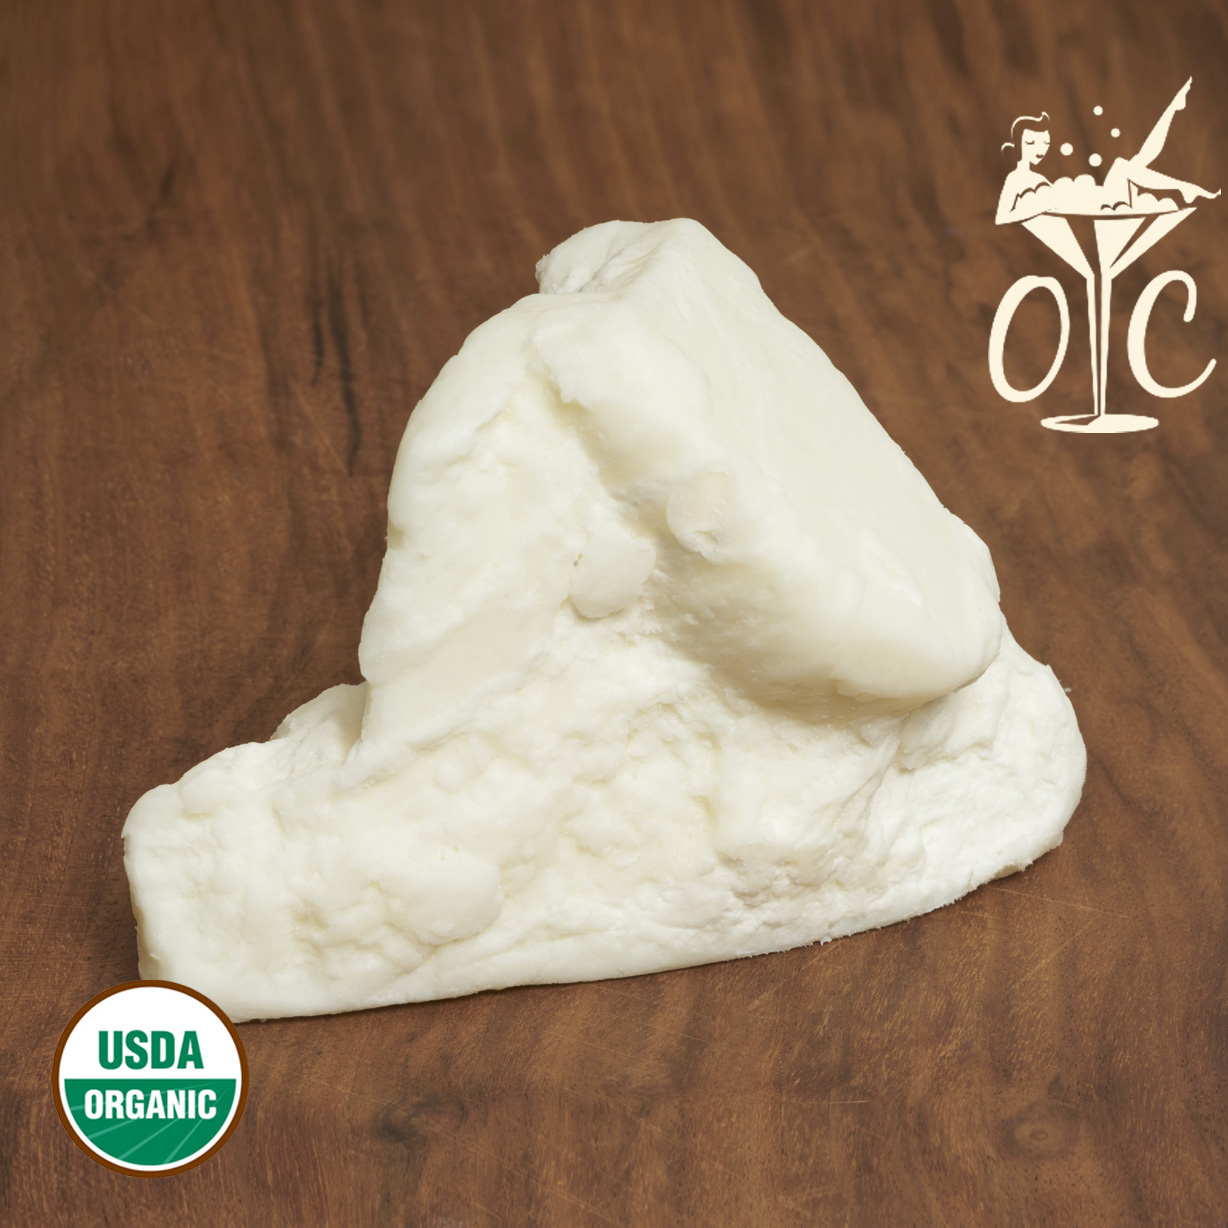 NATURAL Shea Butter Soap Base - 2lb Blocks for only $6.85 at Aztec Candle &  Soap Making Supplies